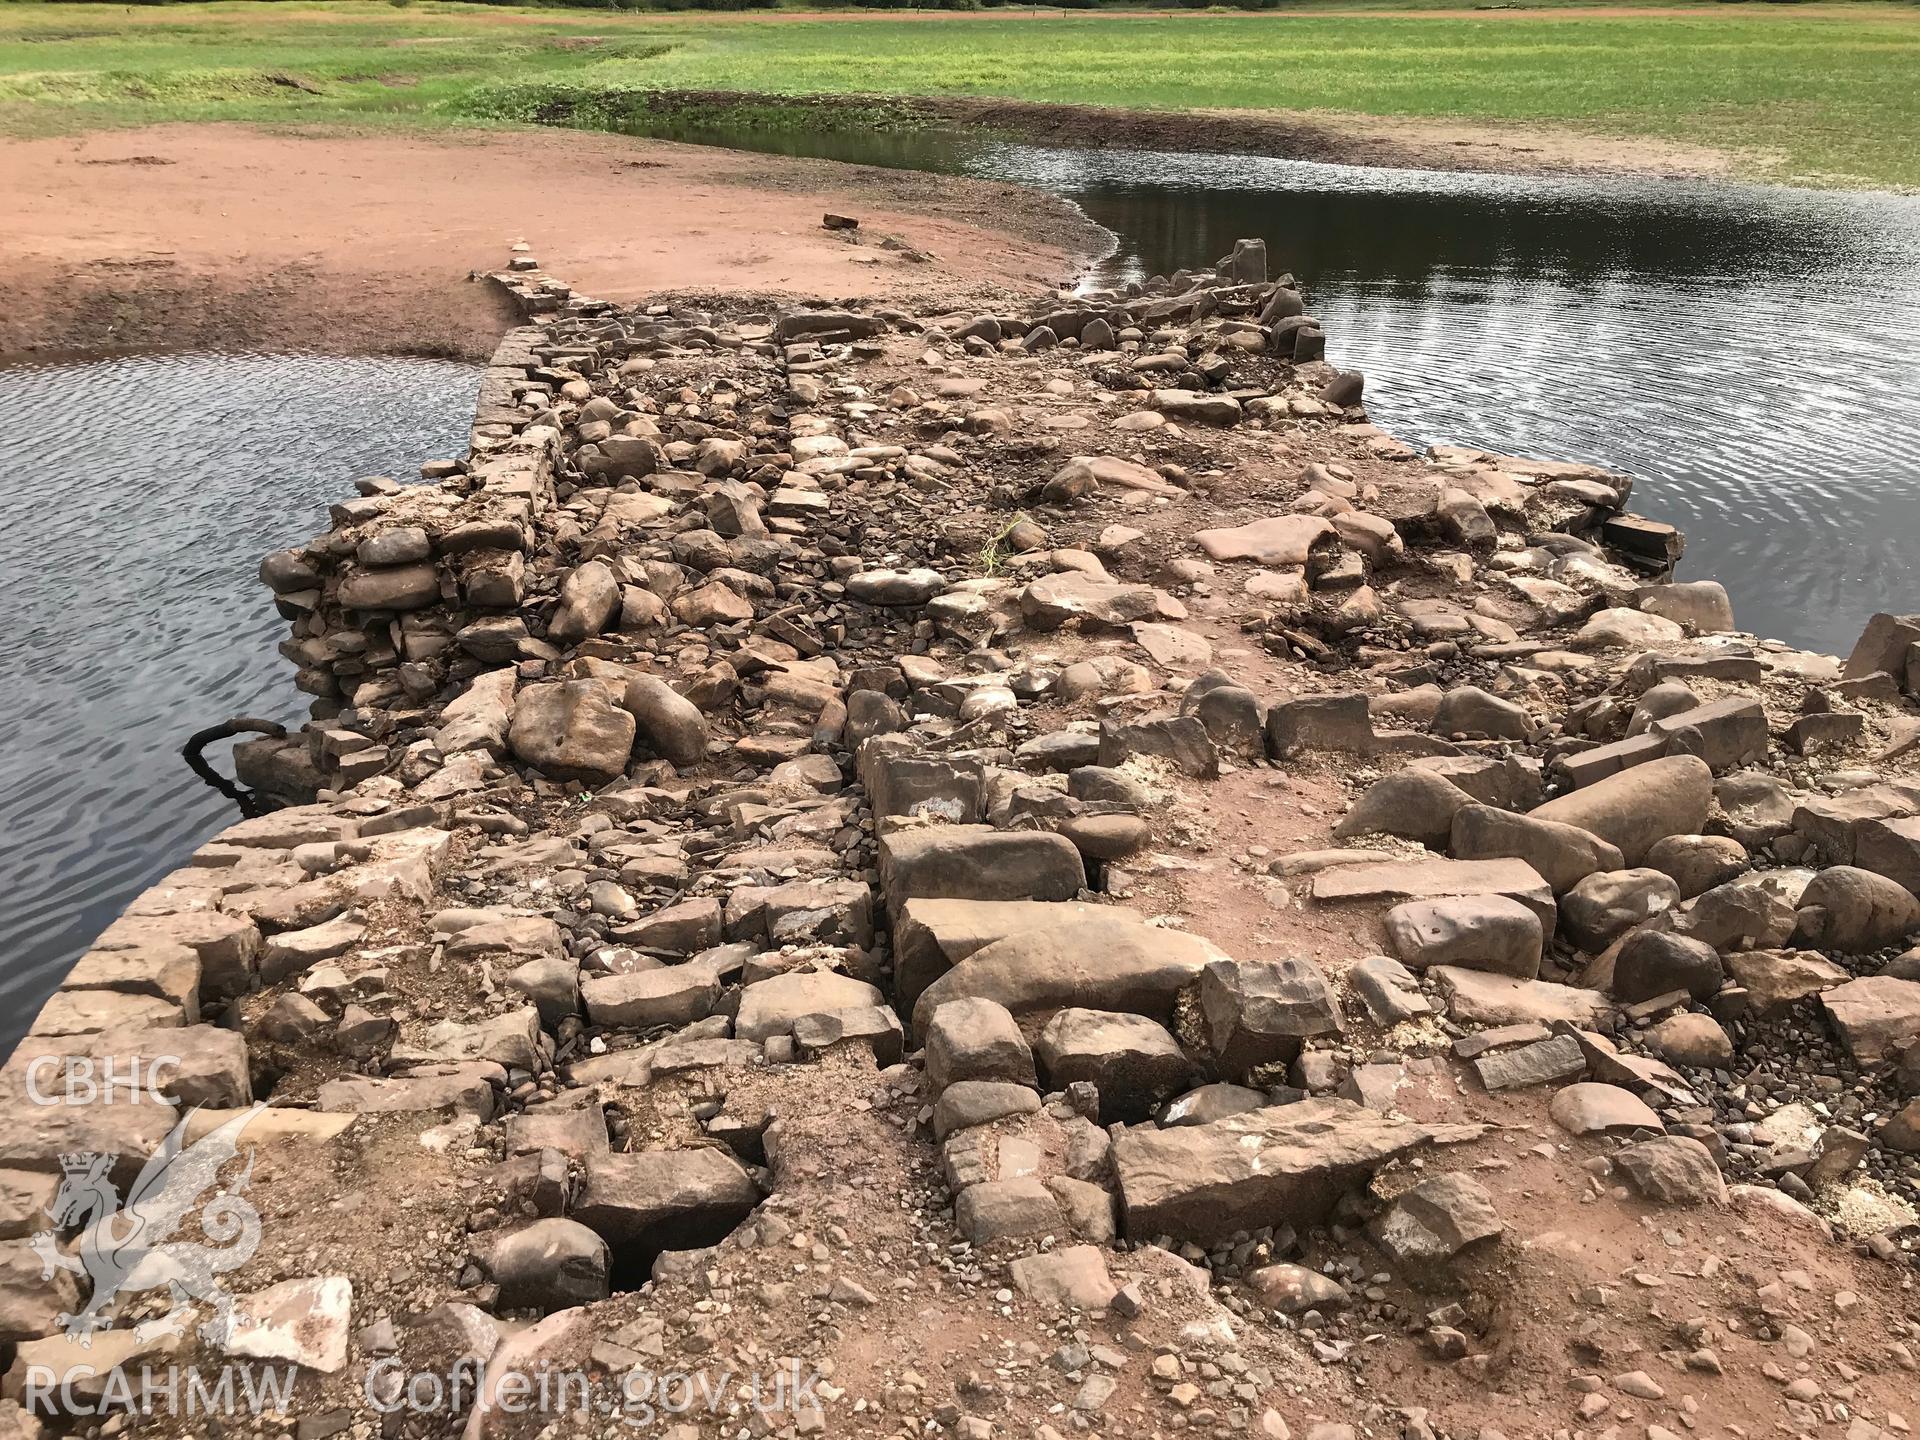 Pont ar Daf - usually submerged by the Llwyn-on reservoir but revealed during the drought conditions of the summer of 2018. Colour photograph taken by Paul R. Davis on 25th August 2018.